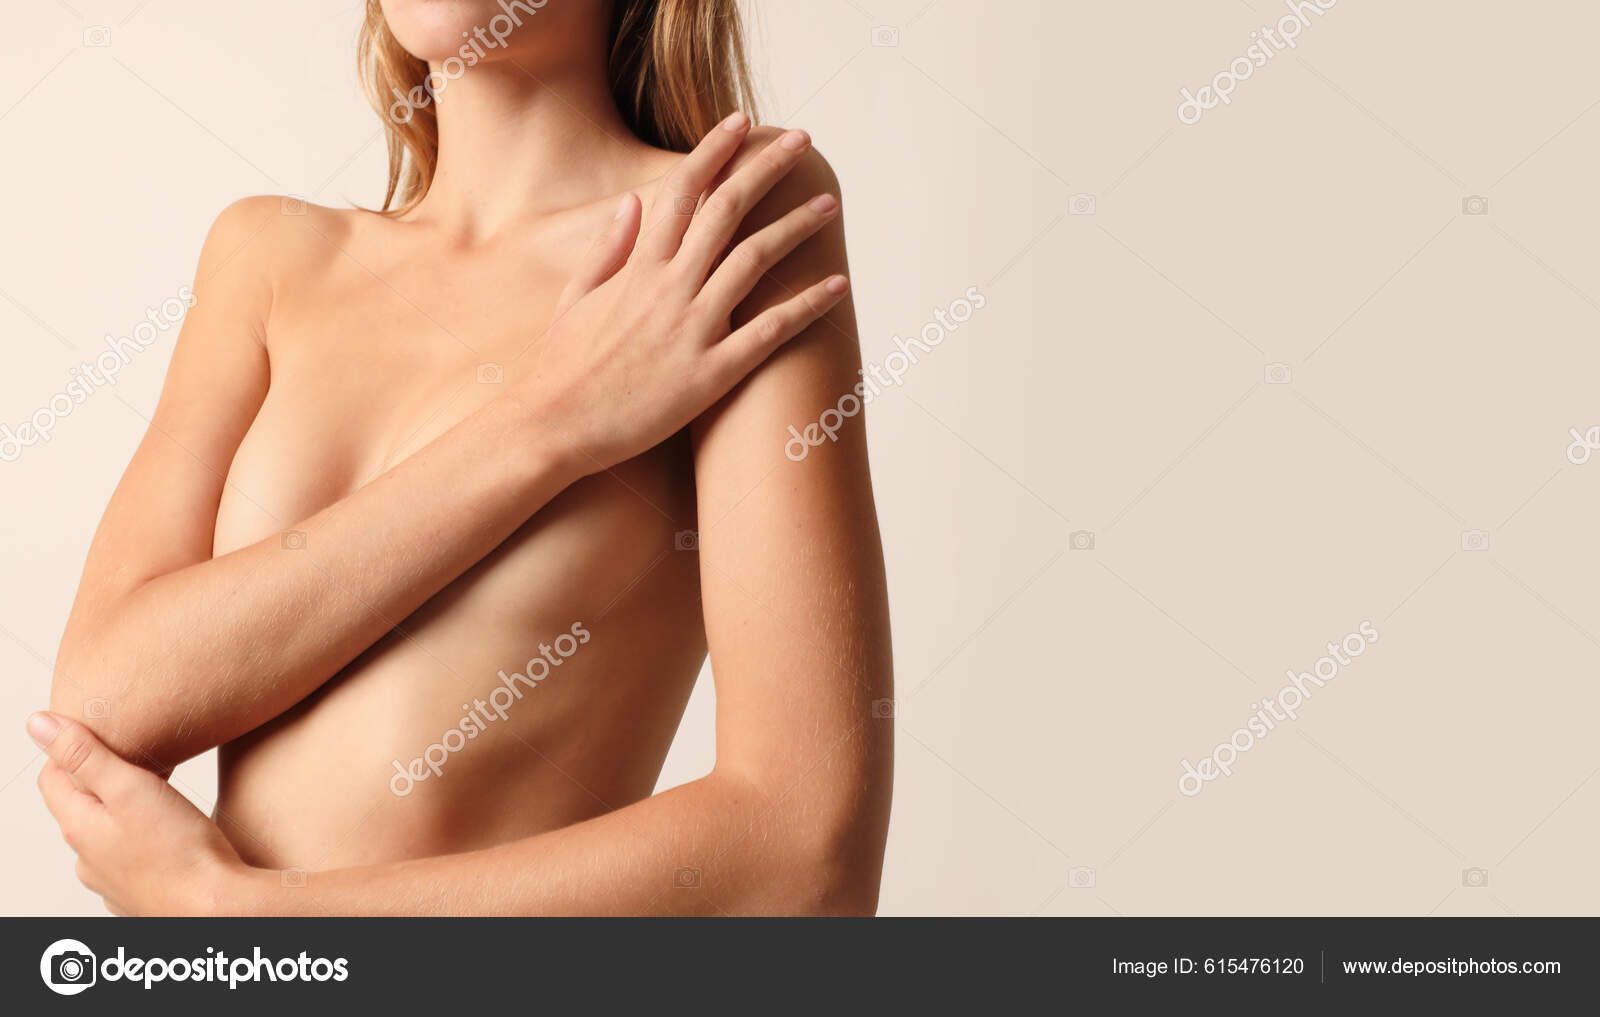 File:A young woman, taken by surprise, covers her breasts. Wellcome  L0074555.jpg - Wikimedia Commons